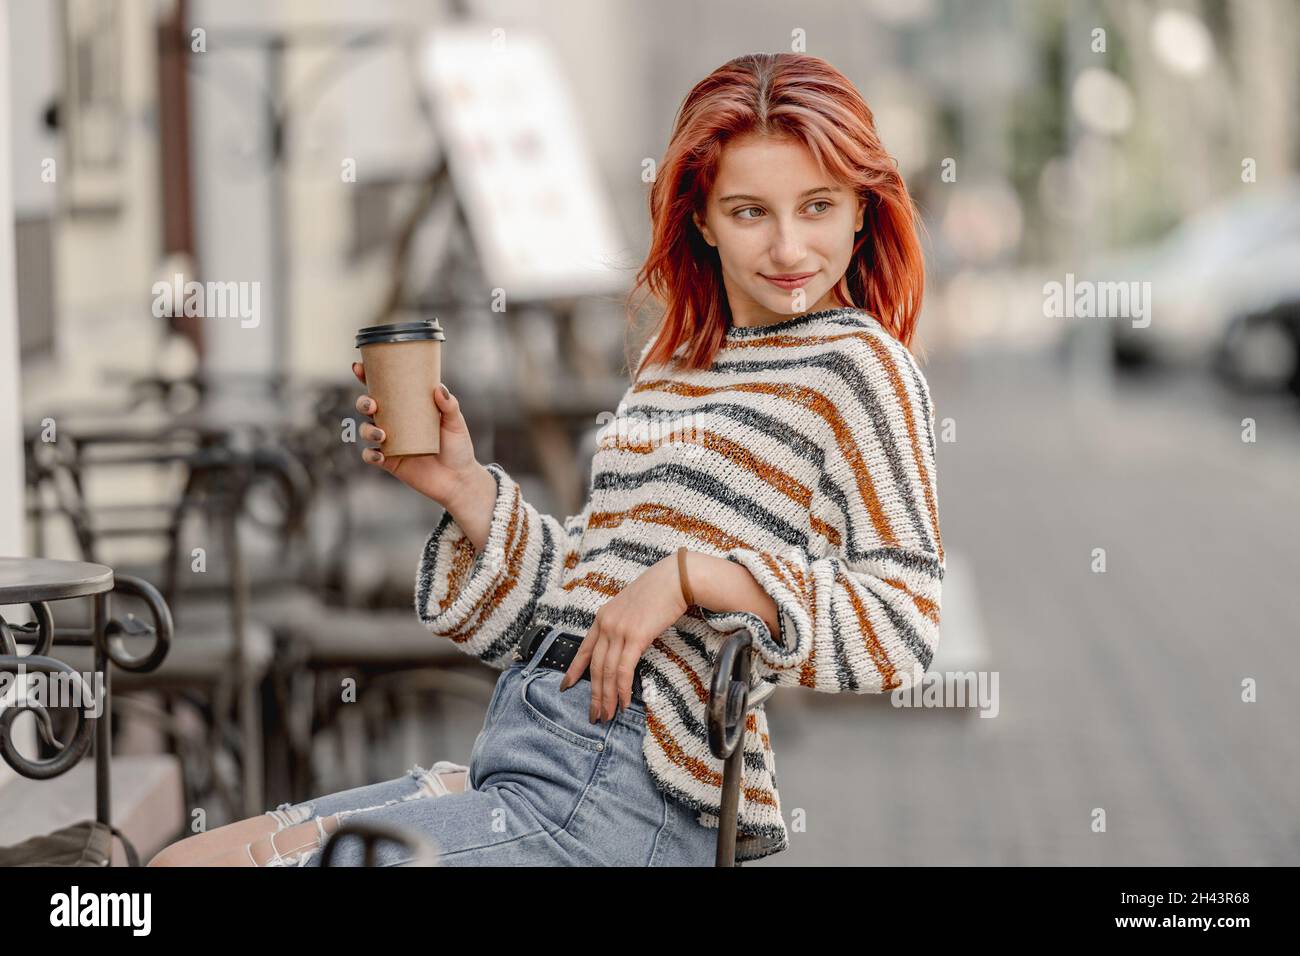 Girl with coffee cup Stock Photo